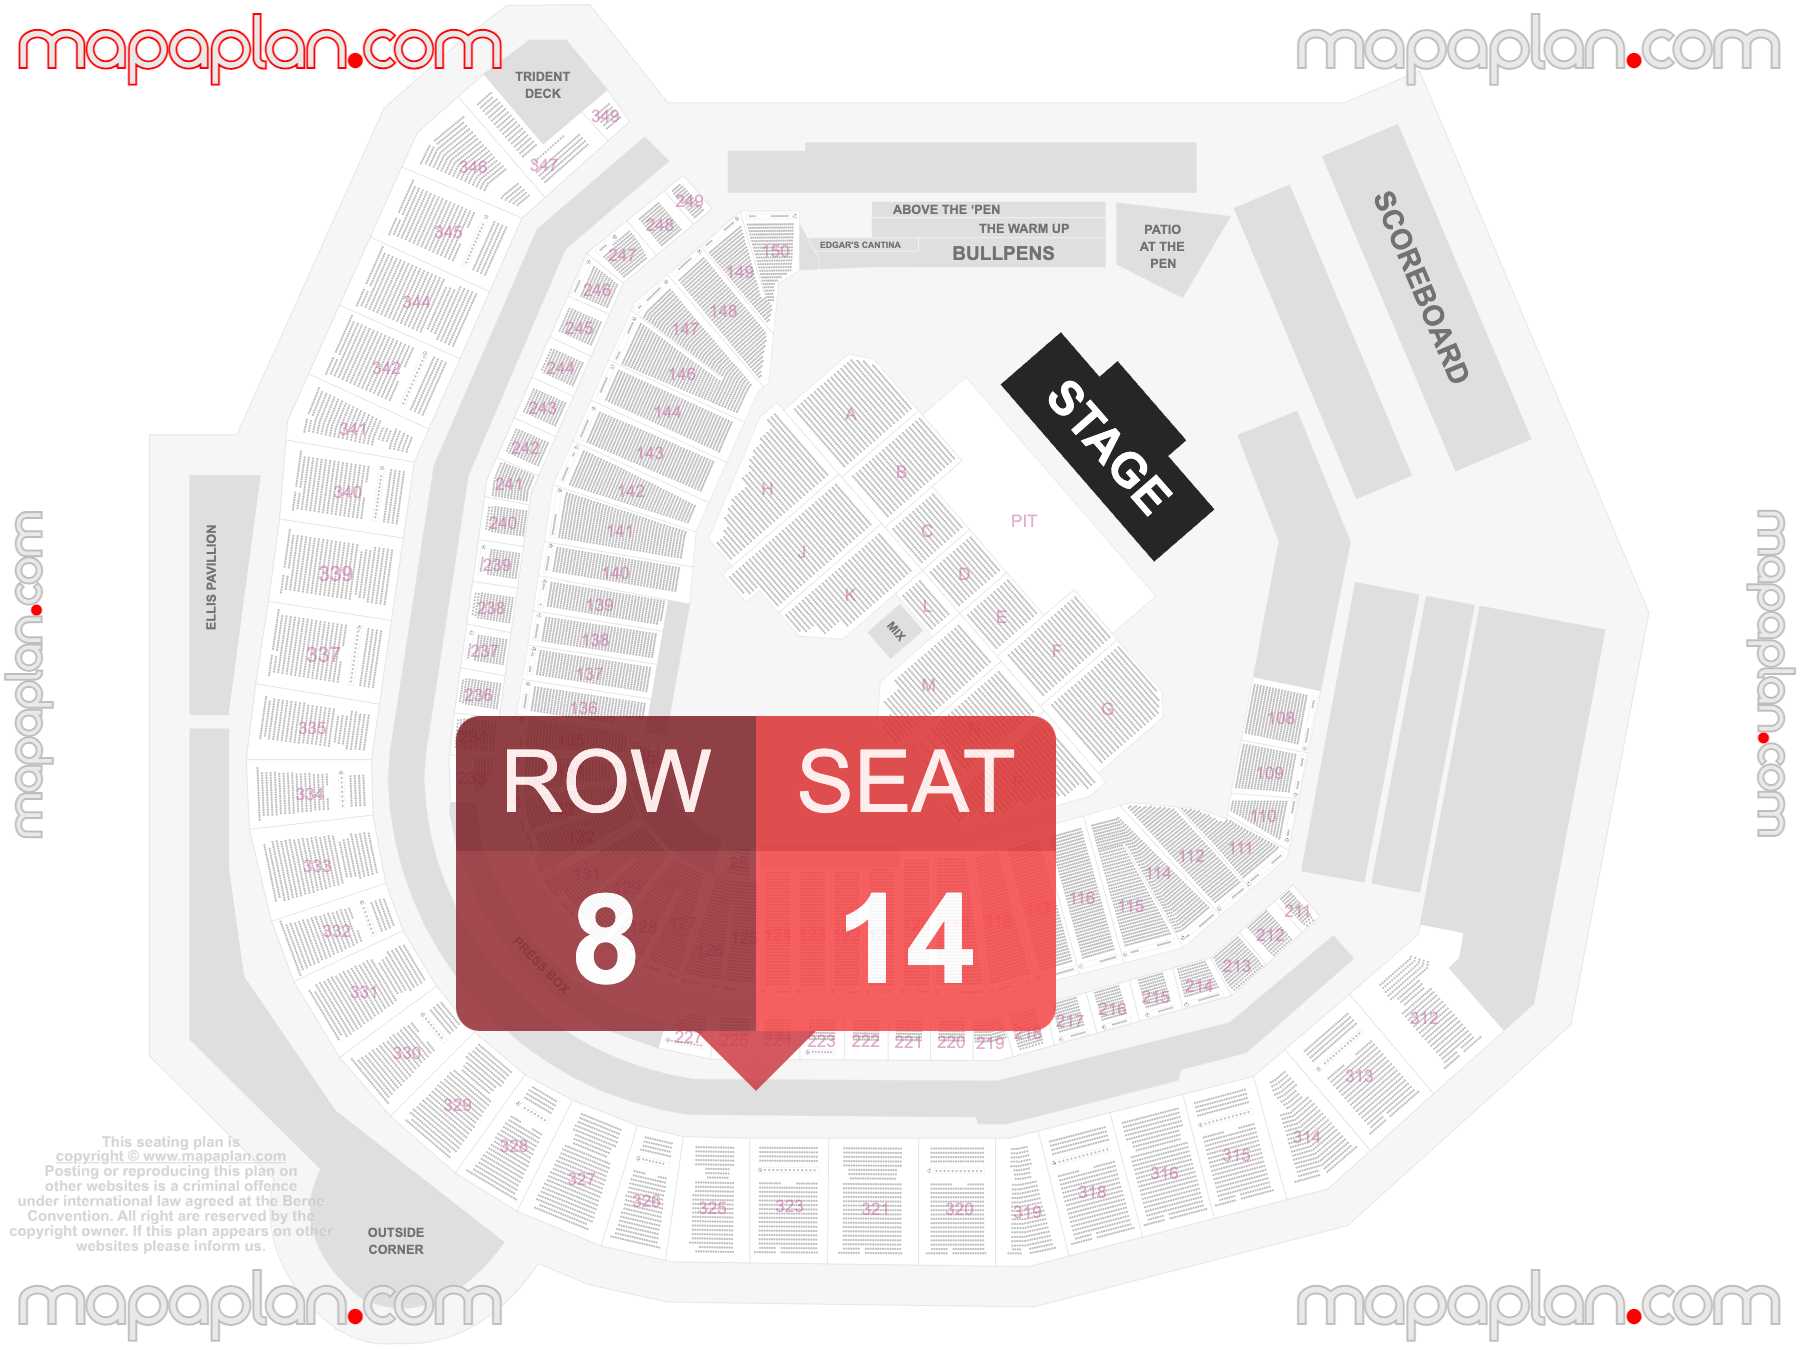 Seattle T-Mobile Park seating chart Concert & Stadium Baseball detailed seat numbers and row numbering chart with interactive map plan layout